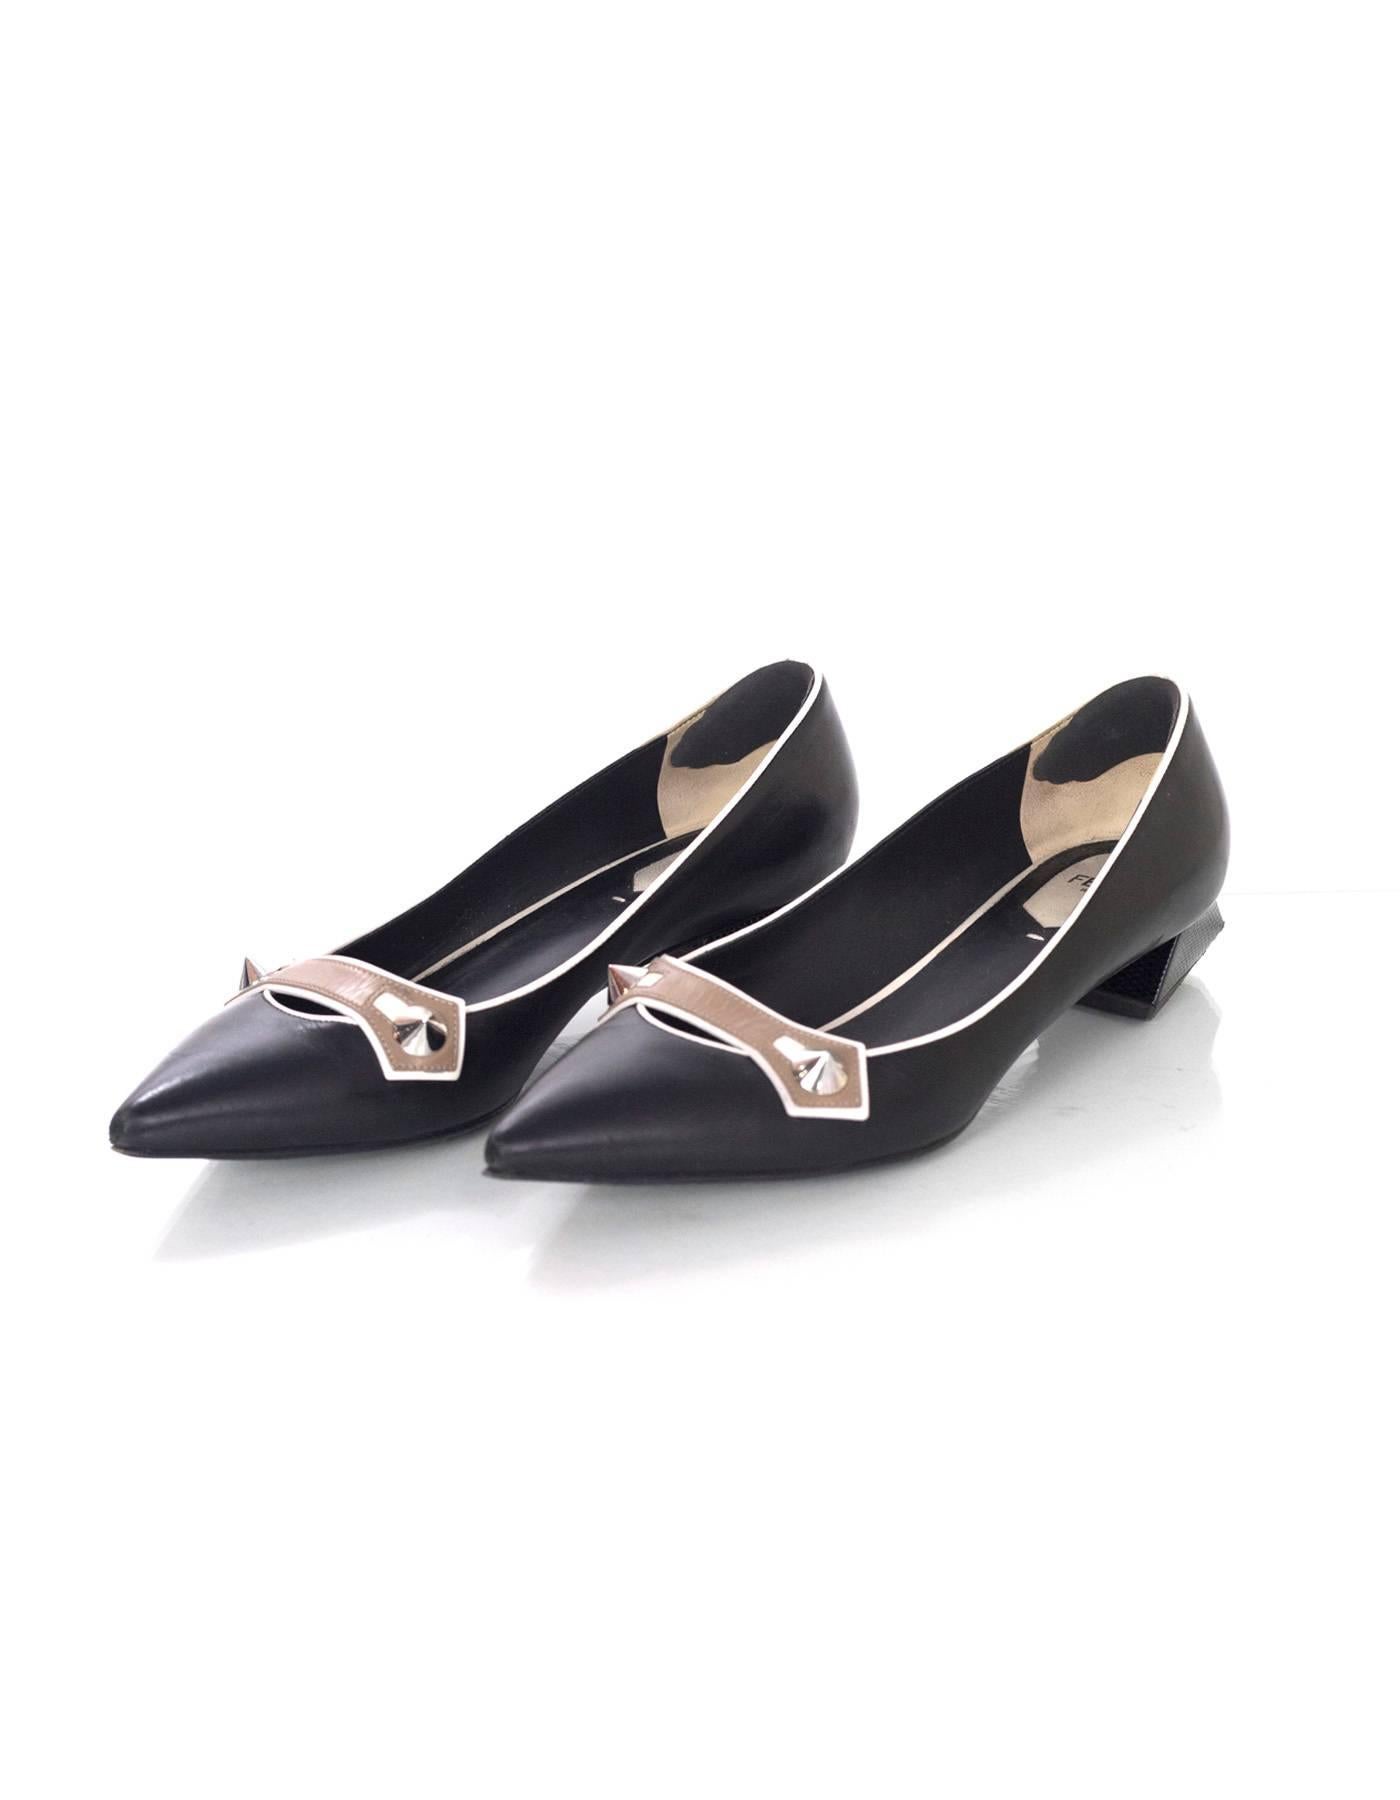 Fendi Black Leather Studded Flats 
Features python wrapped block heel

Made In: Italy
Color: Black and taupe
Materials: Leather and python
Closure/Opening: Slide on
Sole Stamp: Fendi Roma Made in Italy Vero Cuoio 39
Overall Condition: Excellent